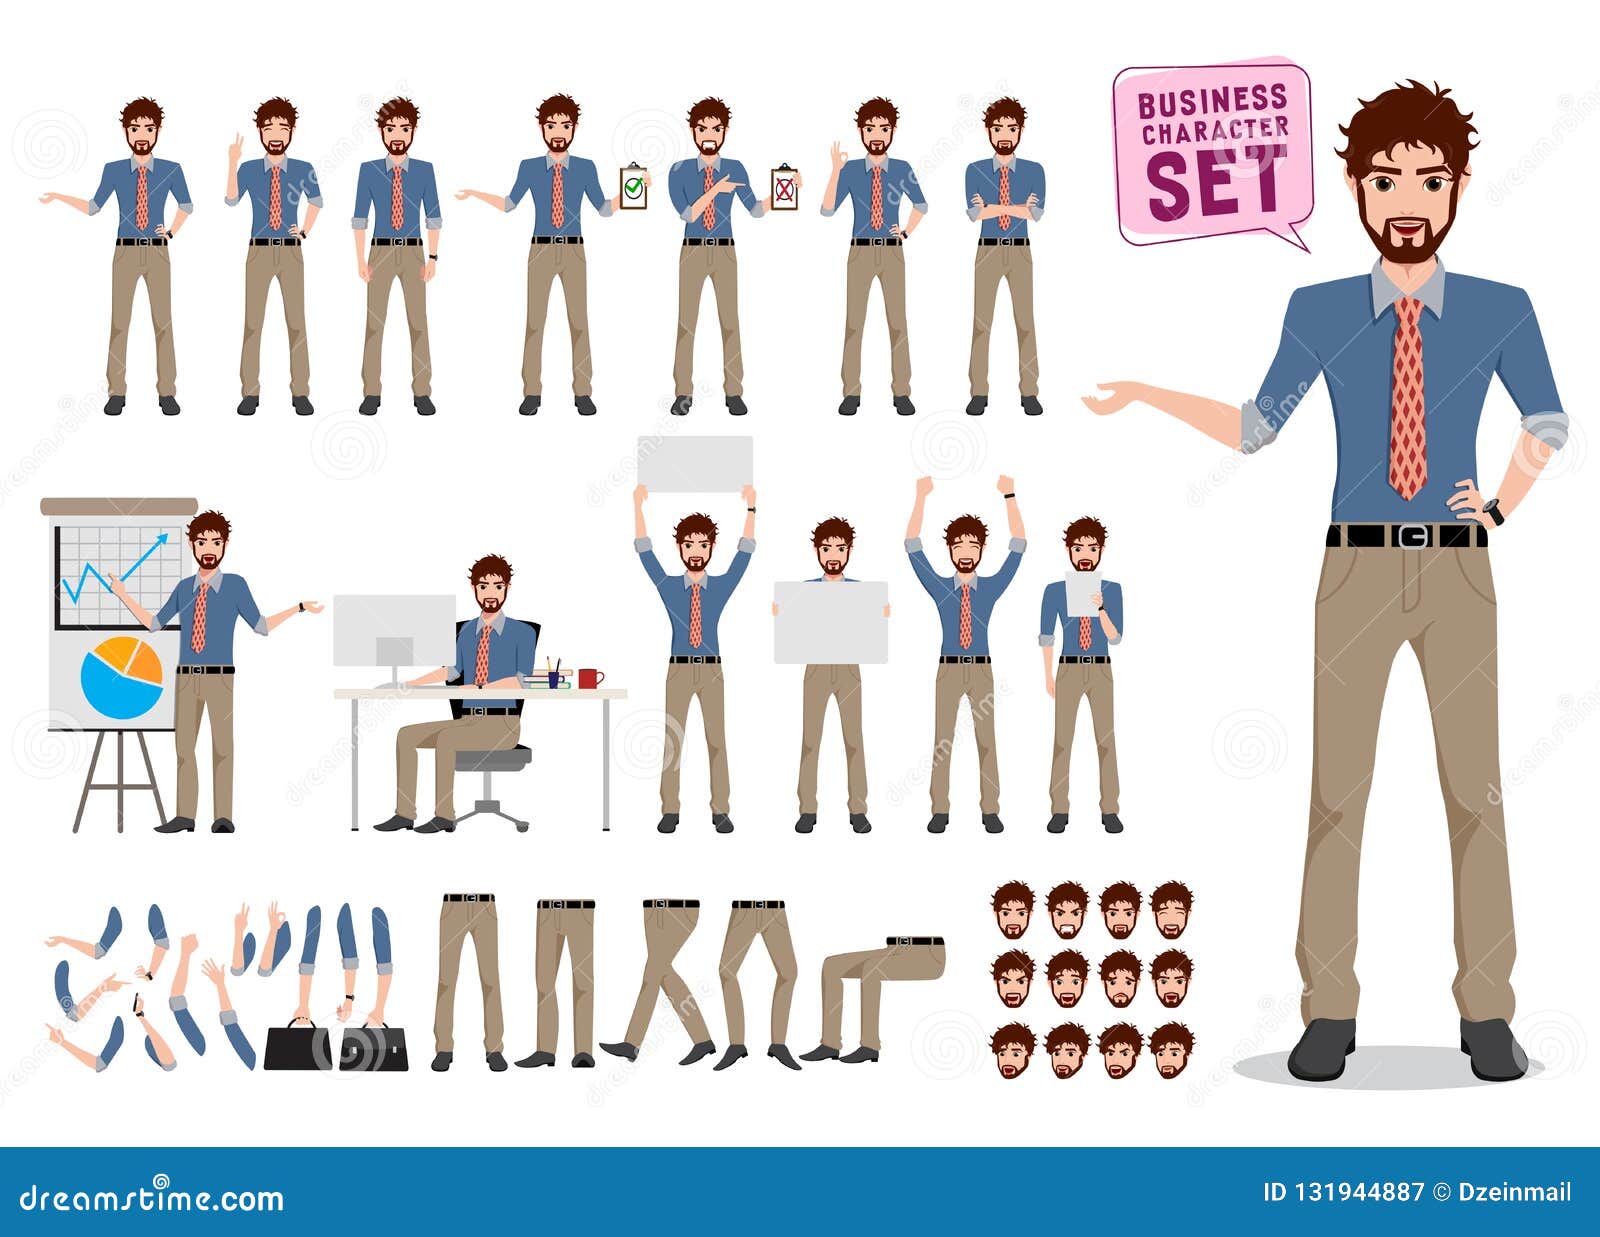 male business character creation  set. office man cartoon character